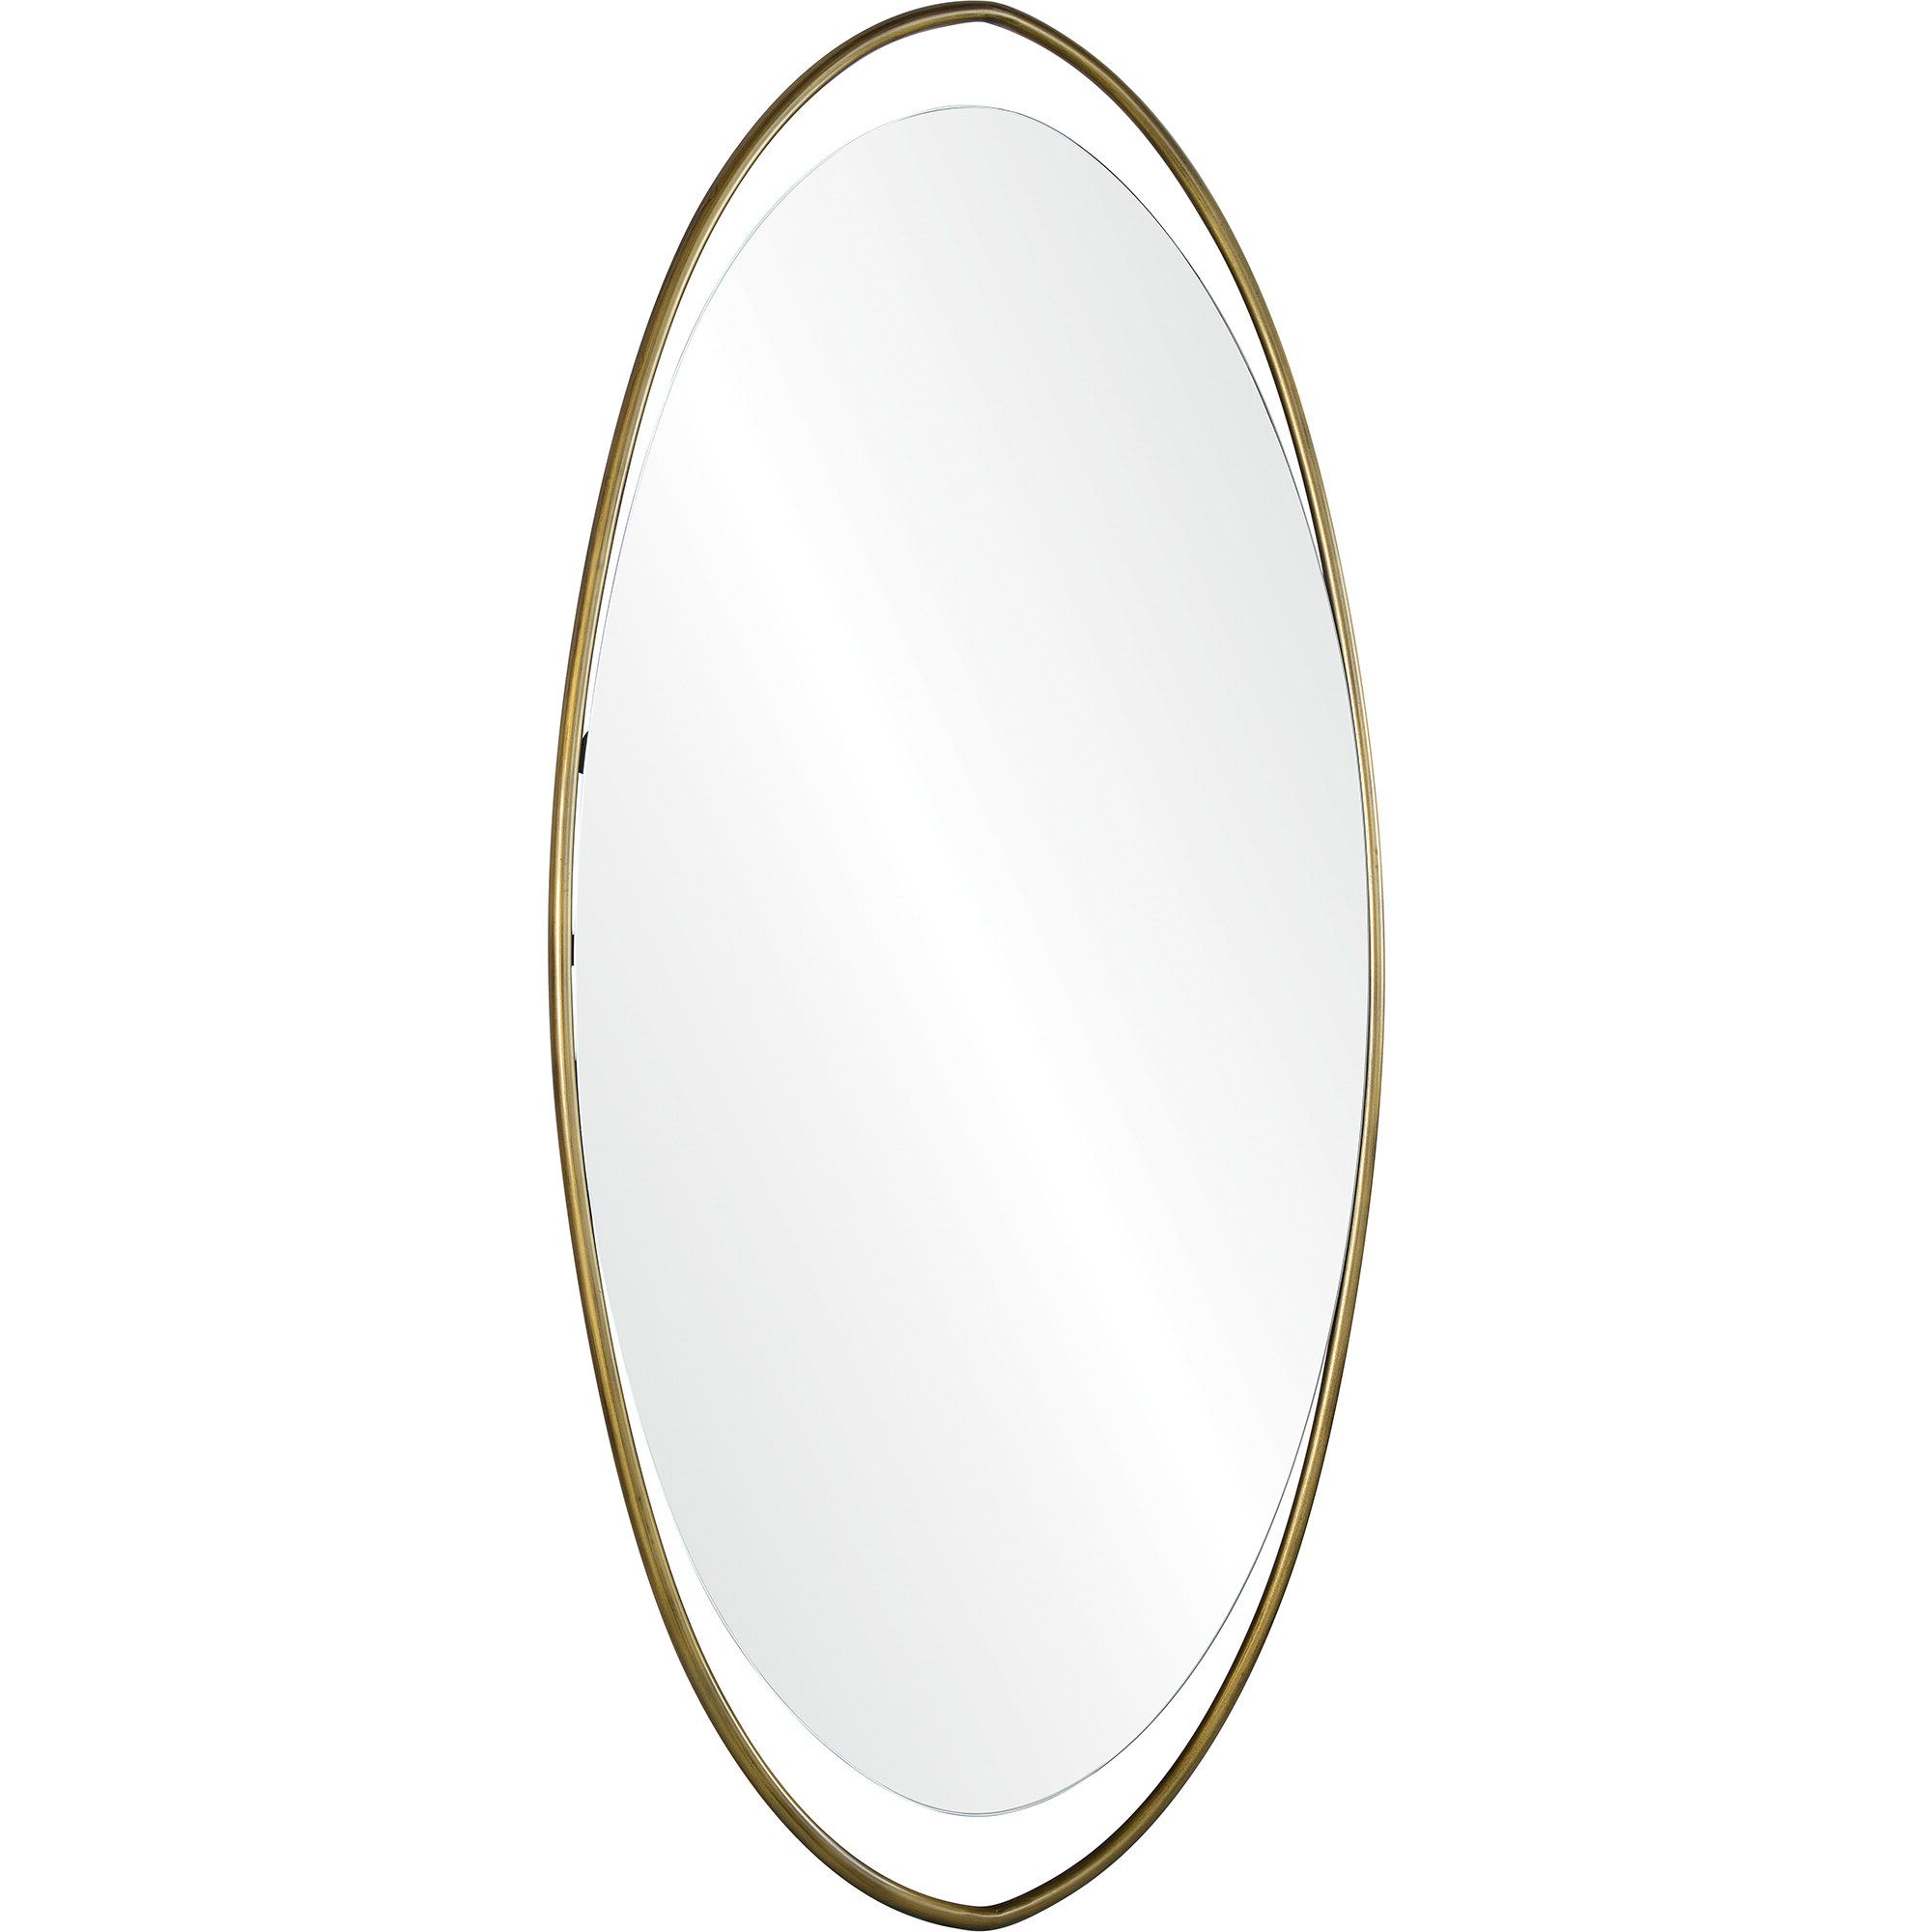 Castellano Modern And Contemporary Accent Mirror With Regard To Trendy Mahanoy Modern And Contemporary Distressed Accent Mirrors (View 5 of 20)